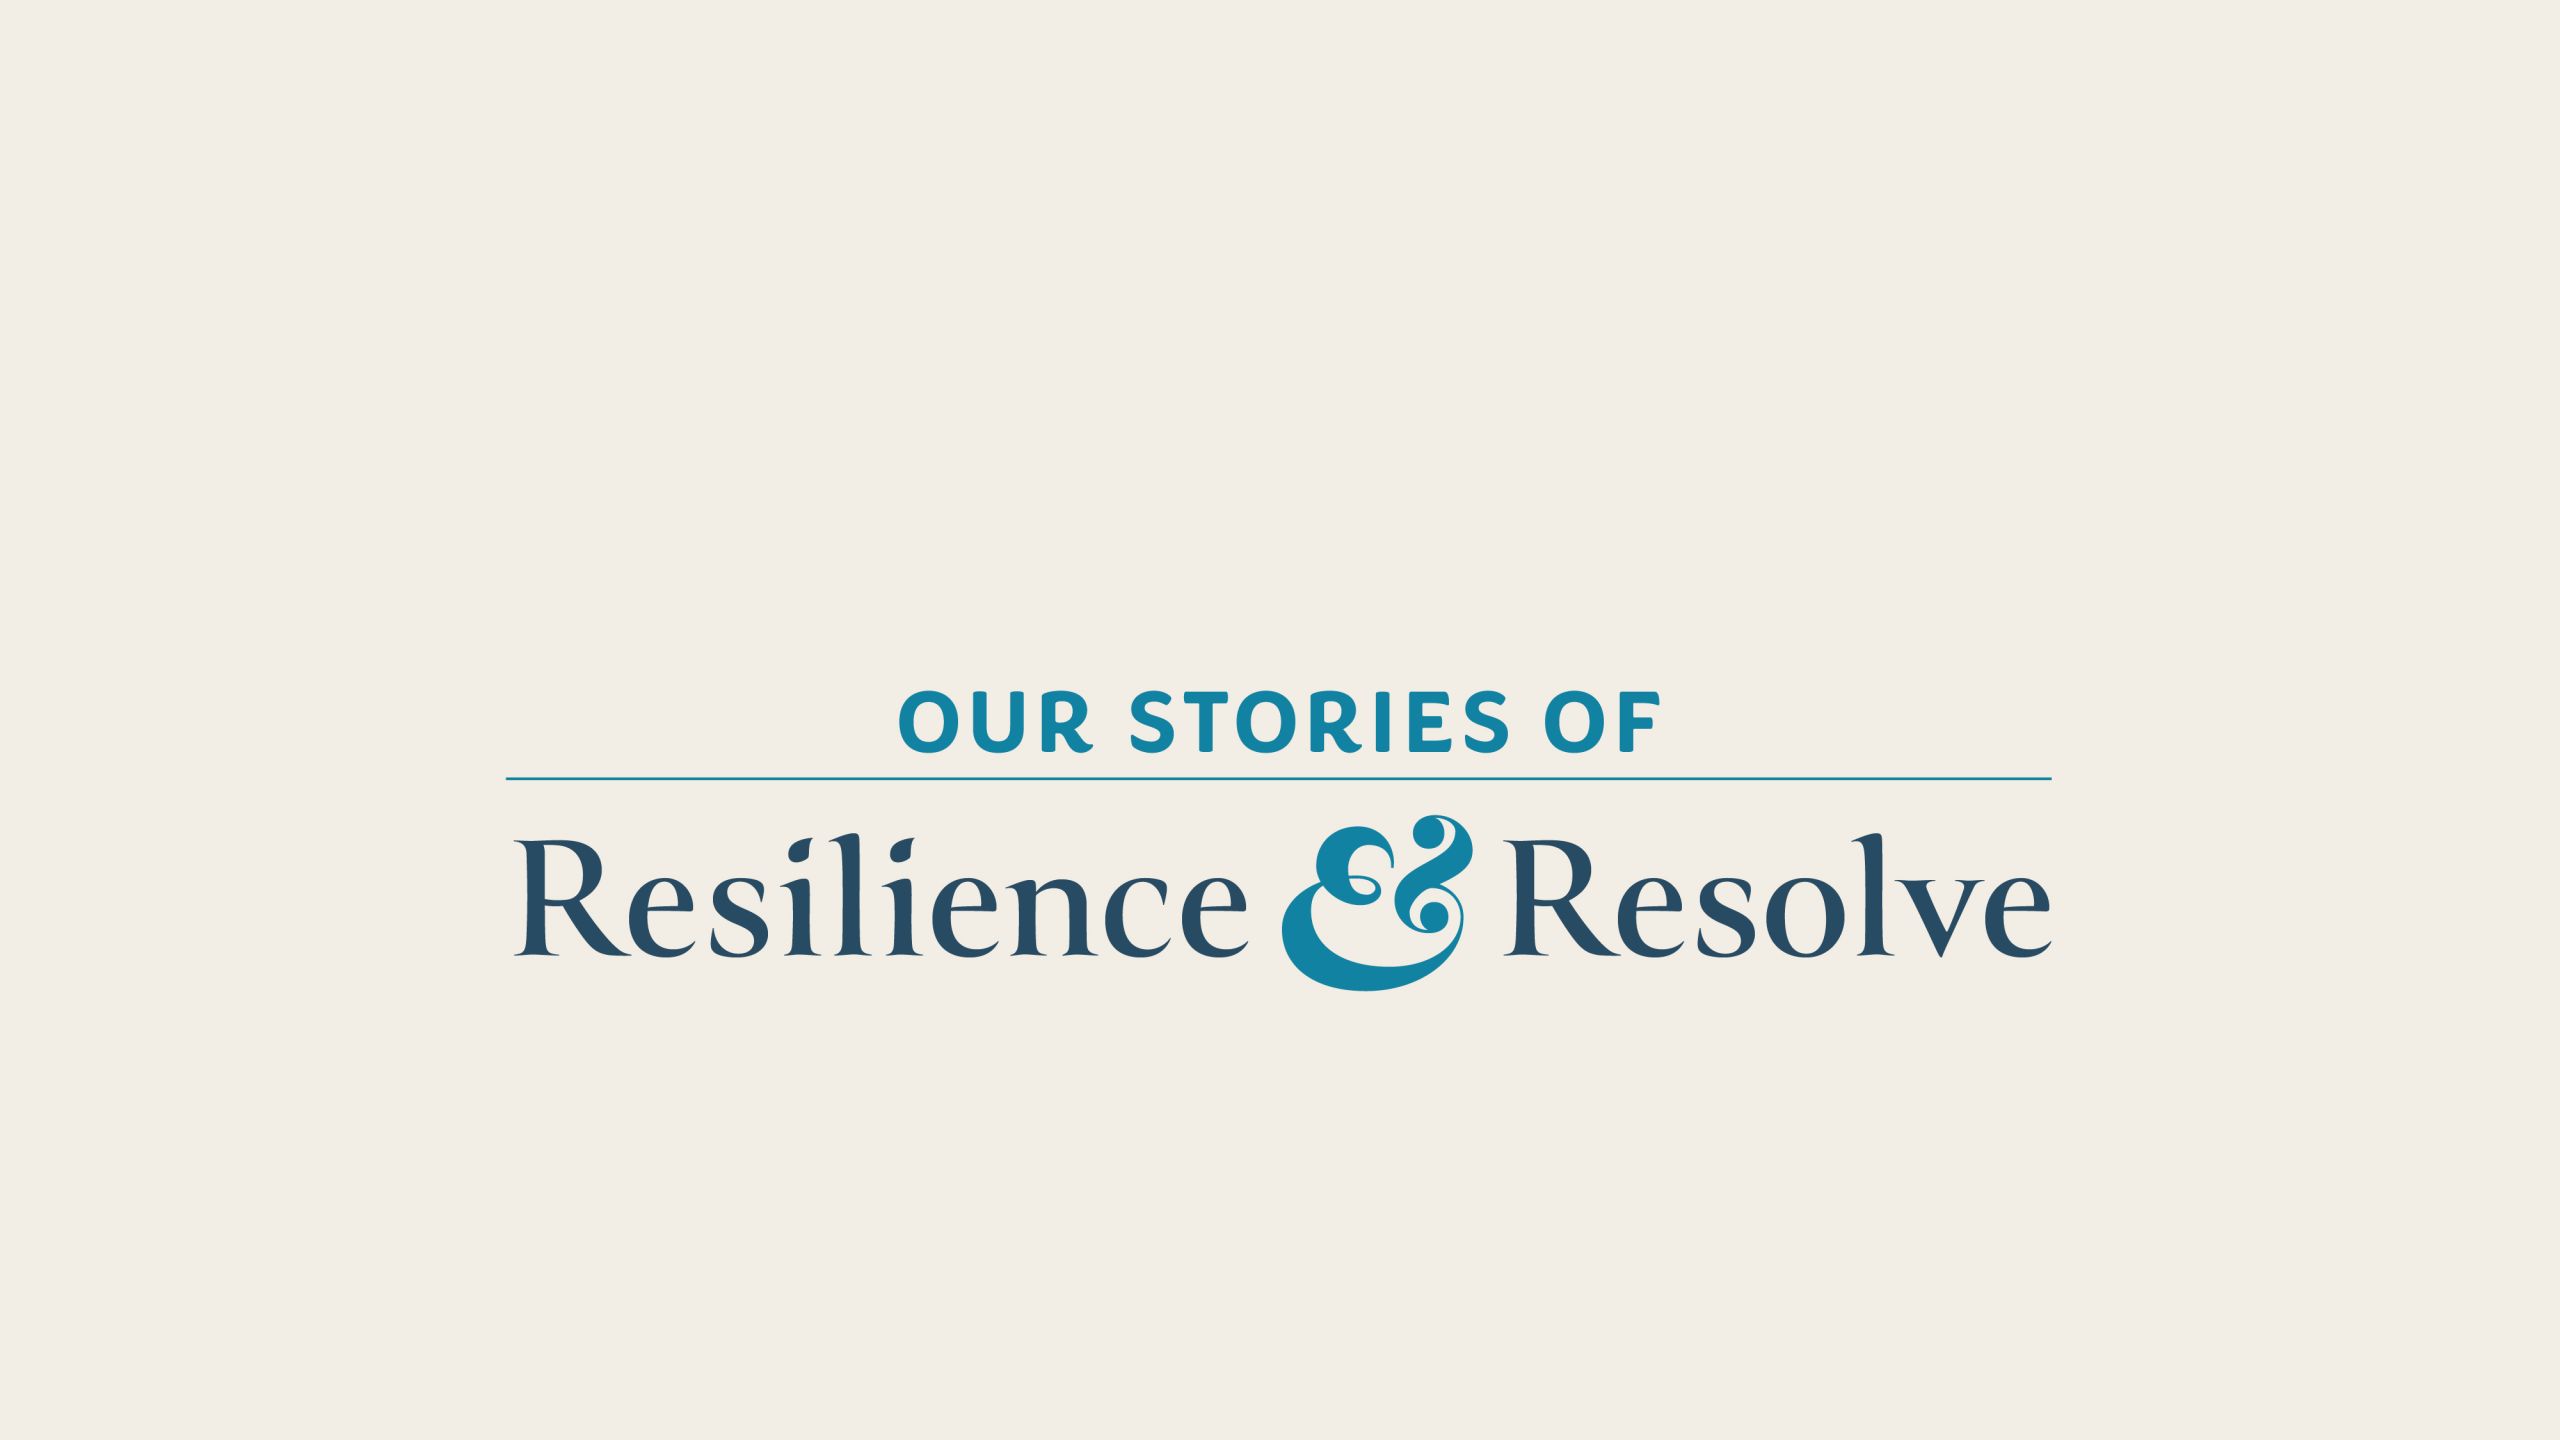 Our Stories of Resilience and Resolve